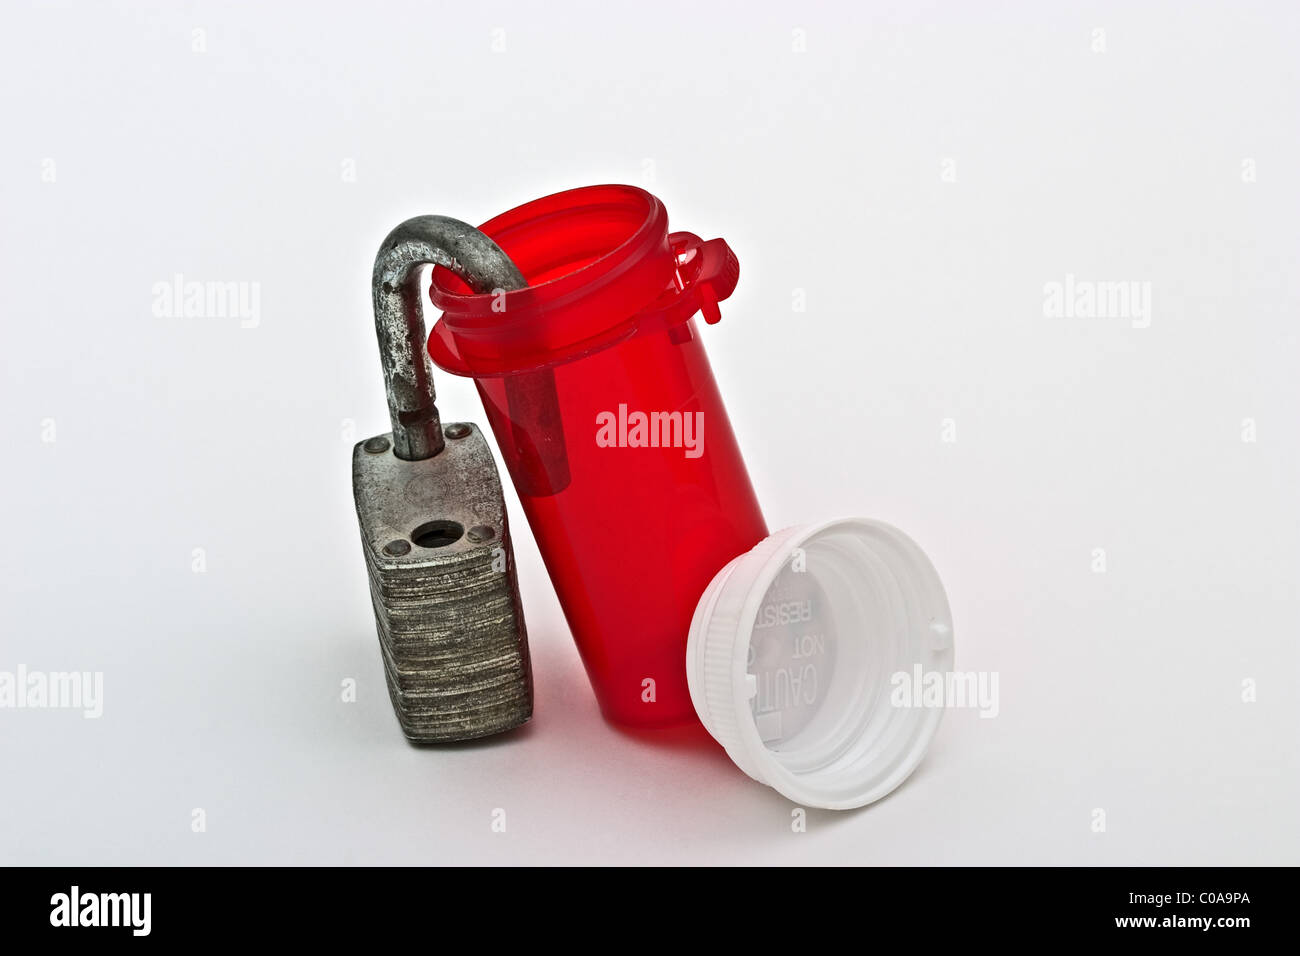 Empty prescription bottle with white plastic cover leaning on an open pad lock Stock Photo